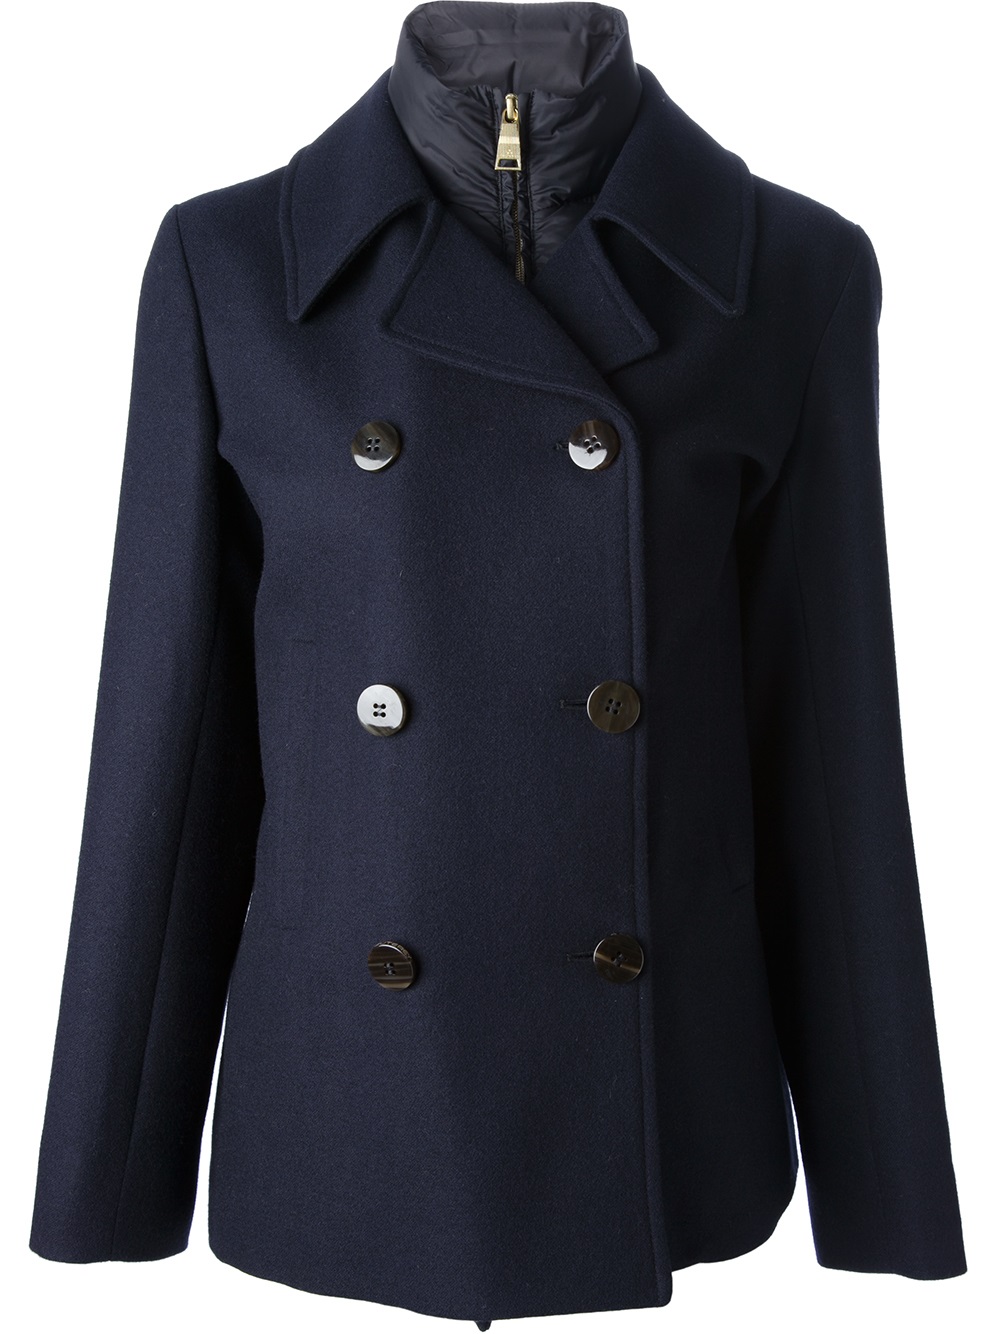 Lyst - Peuterey Doublebreasted Short Peacoat in Blue